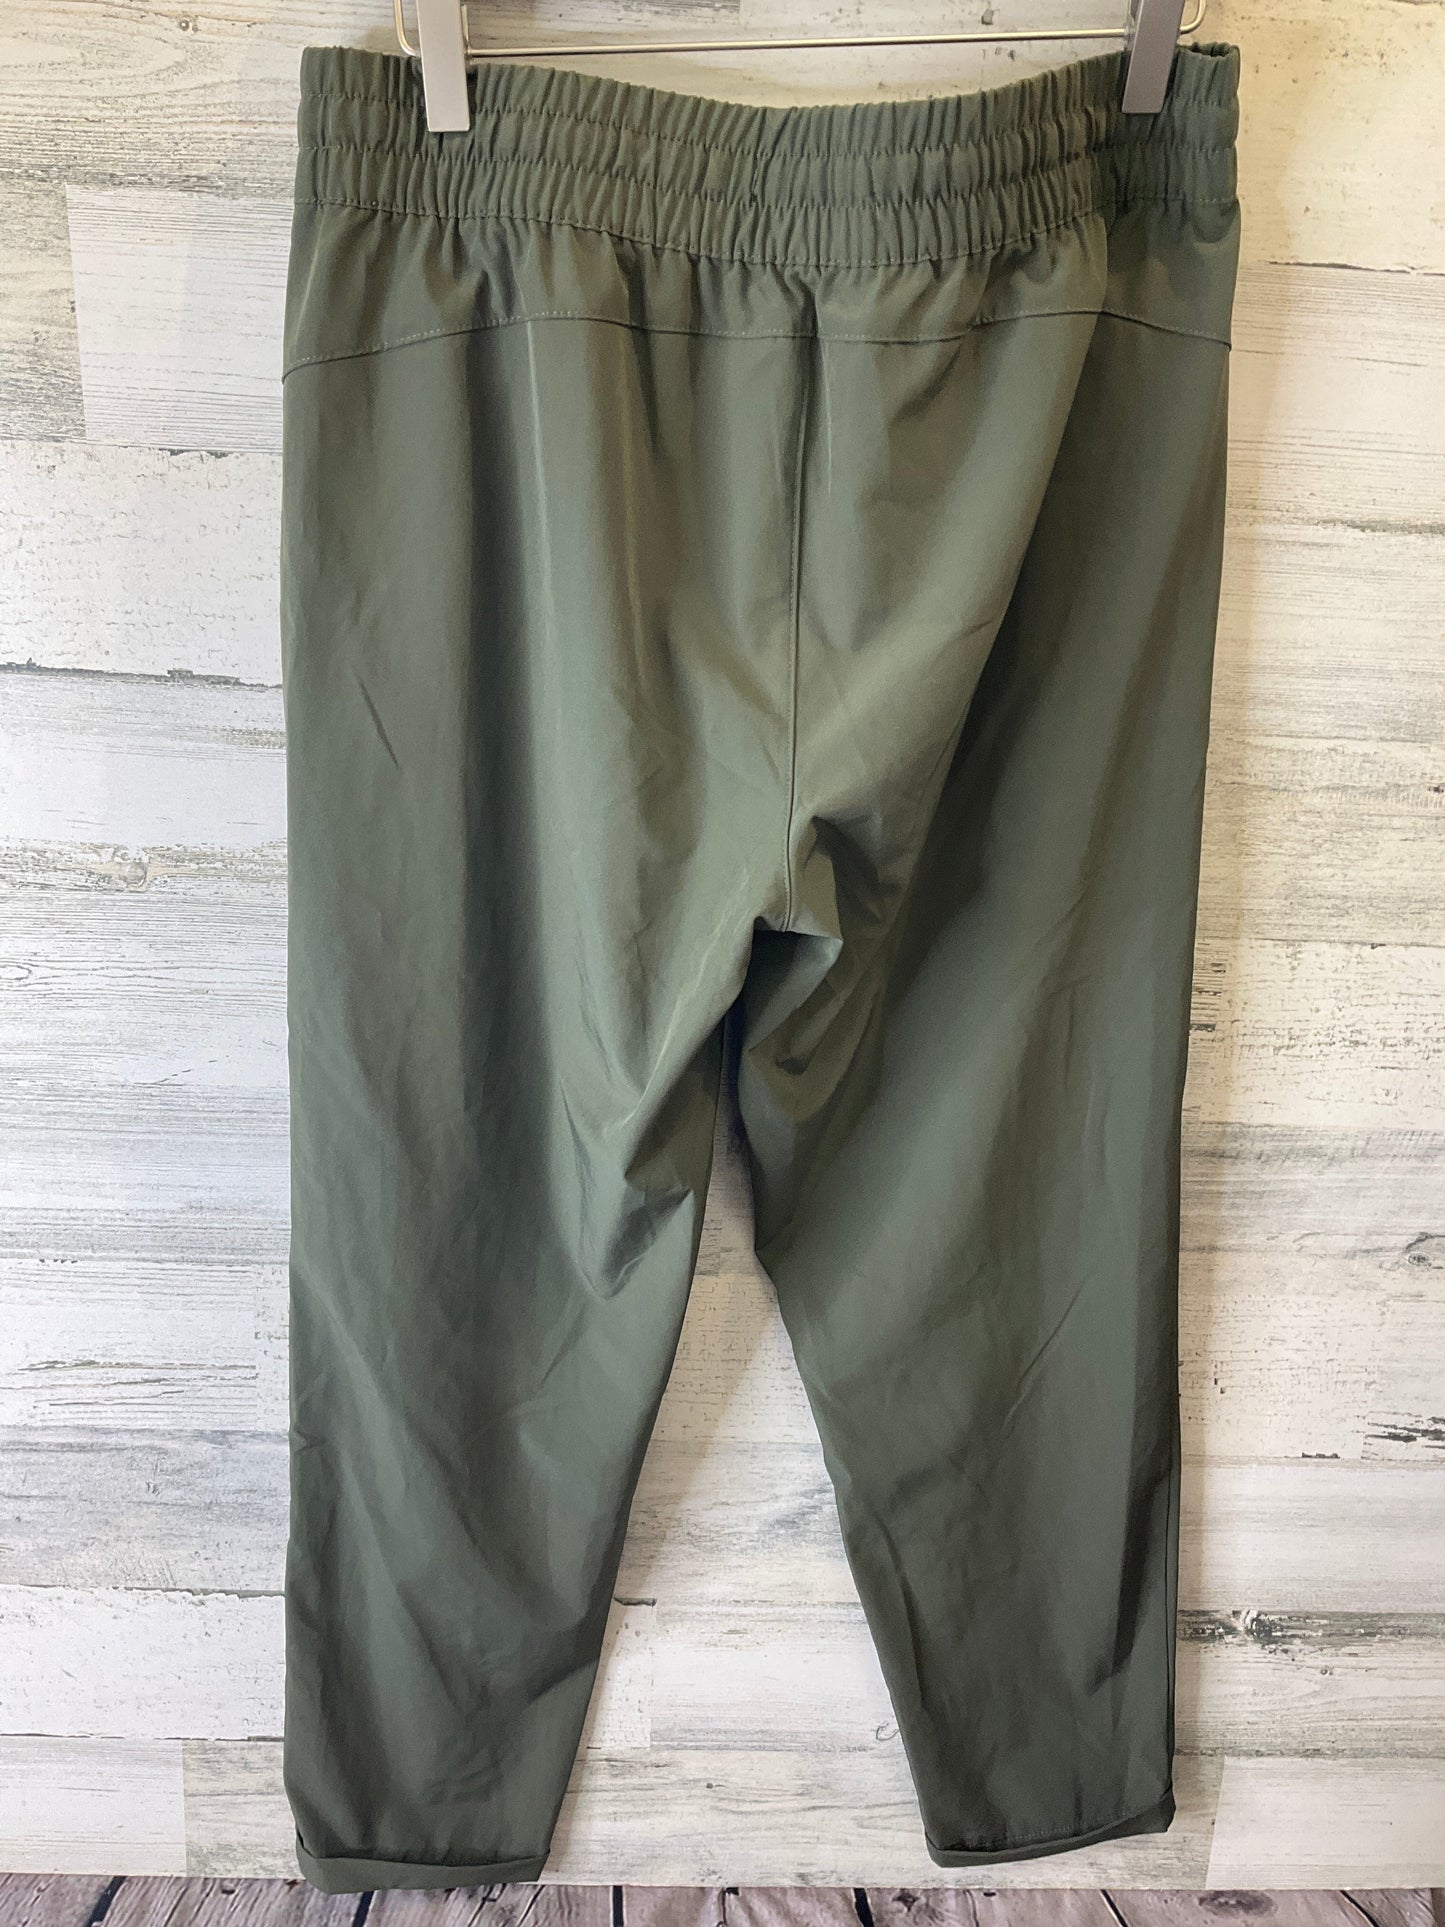 Green Athletic Pants Clothes Mentor, Size 8